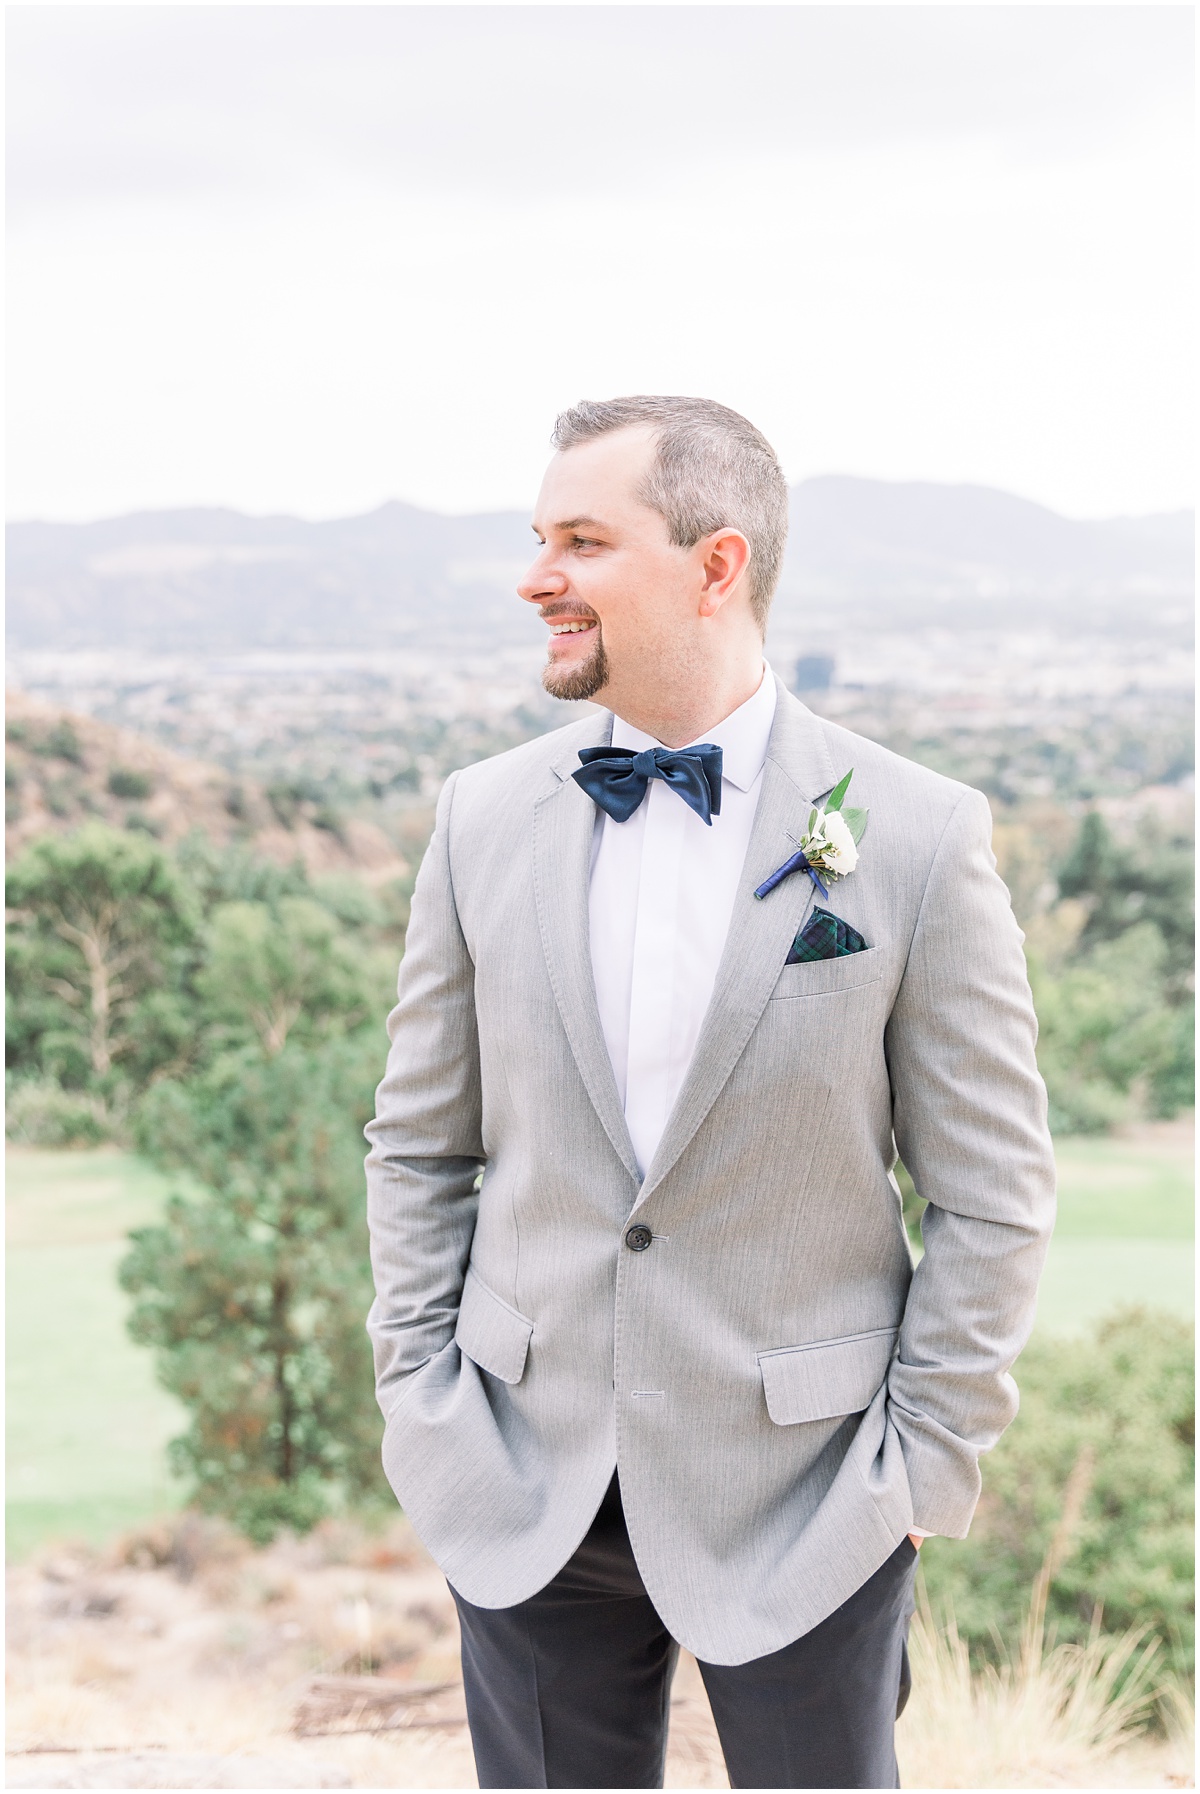 Groom portraits with a view of the city | The Castaway Burbank Wedding by Peter and Bridgette